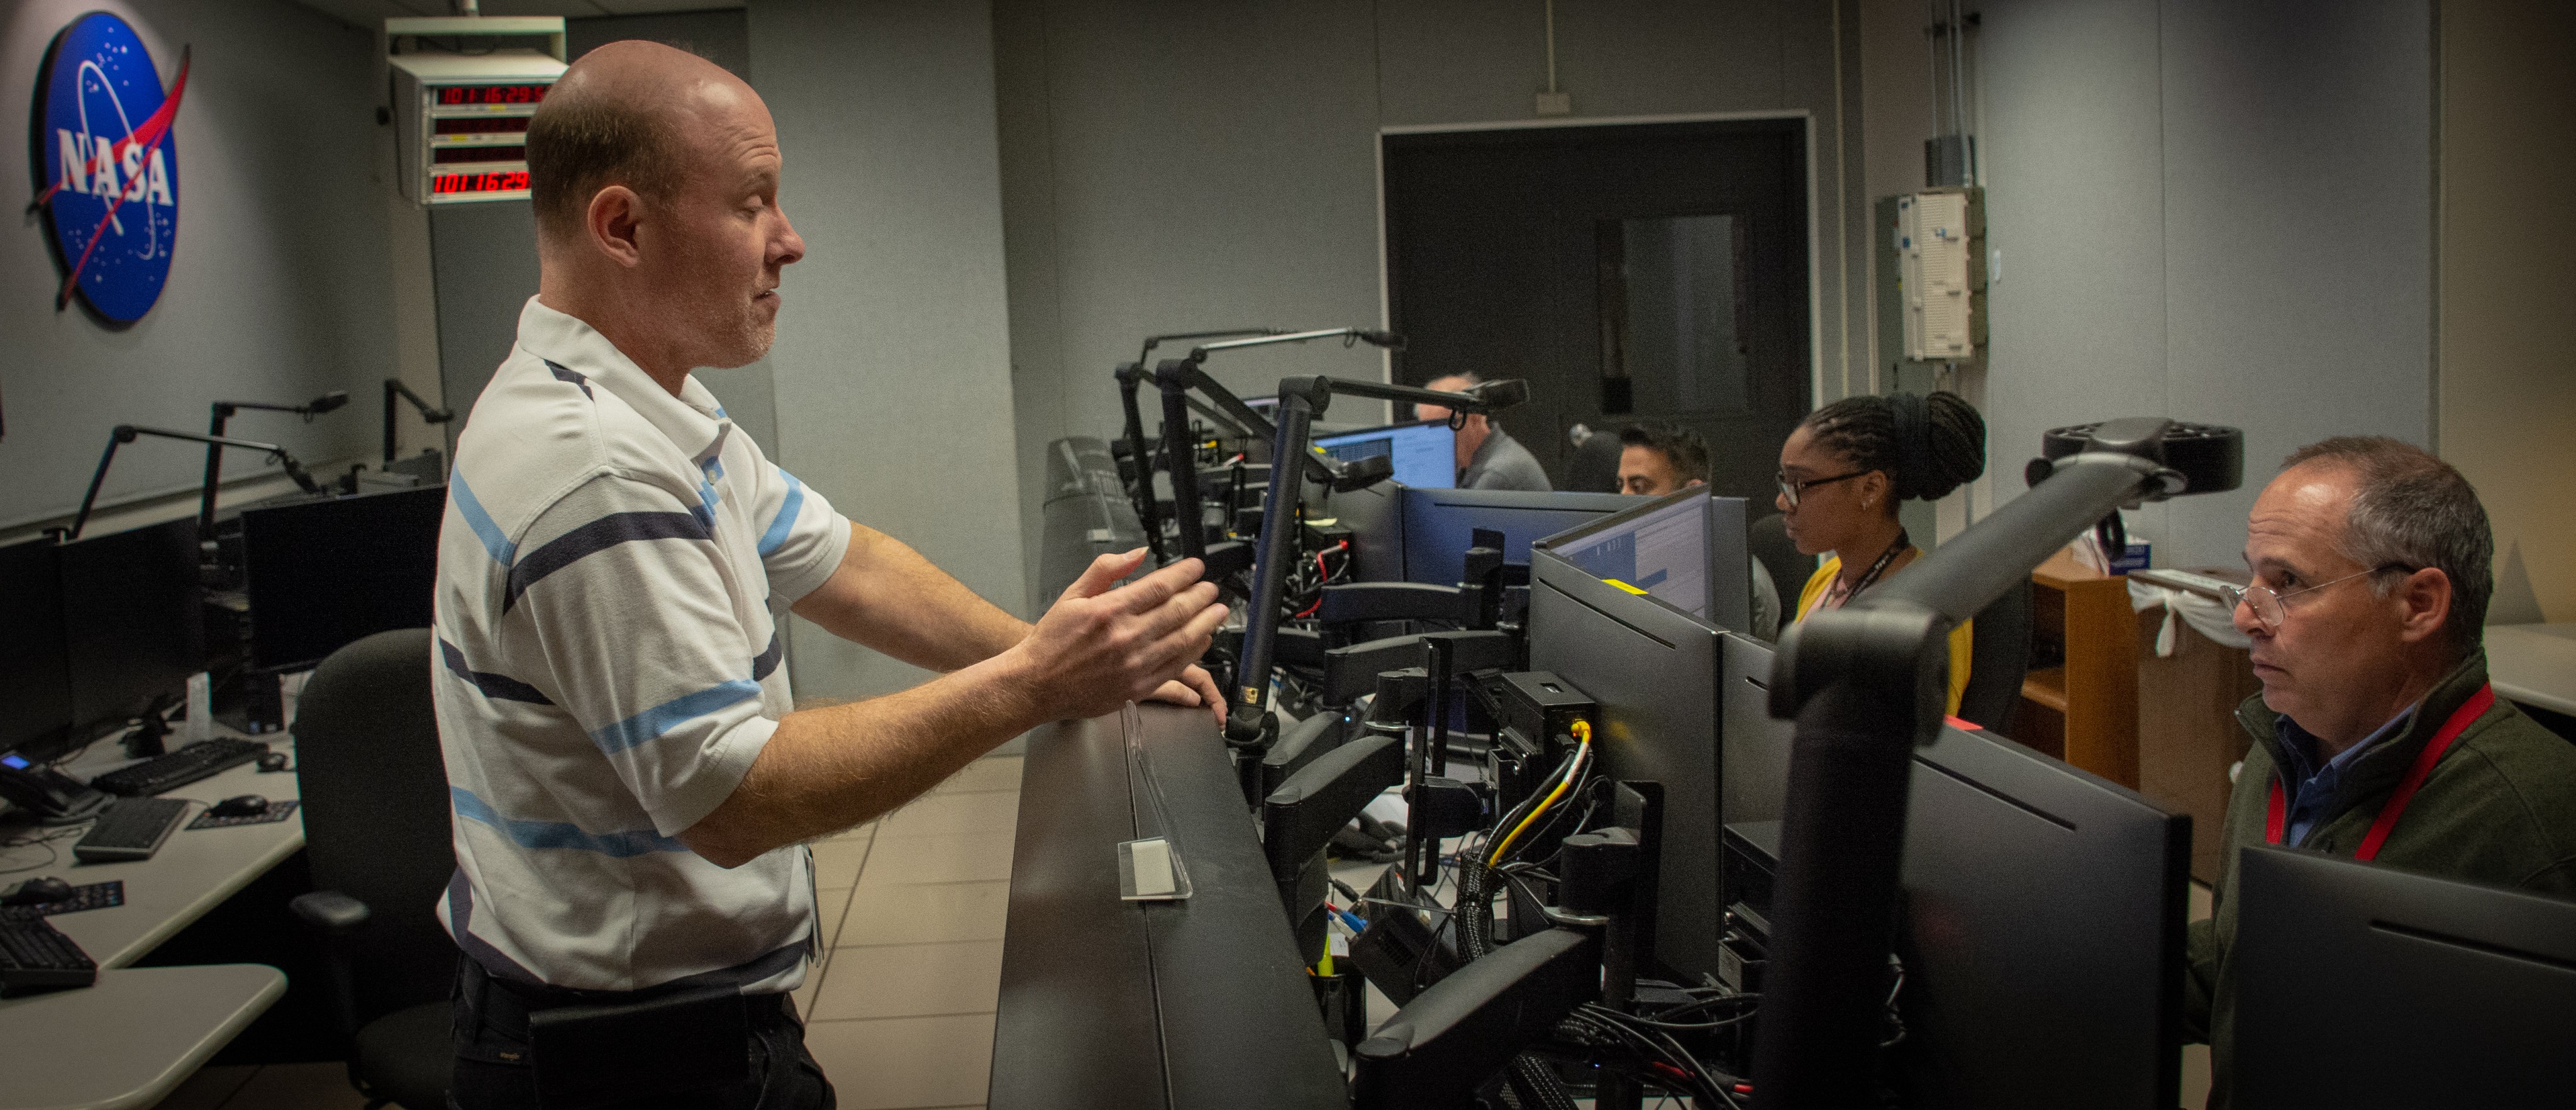 An engineer discusses Hubble spacecraft communications with flight controllers in the Hubble control room.